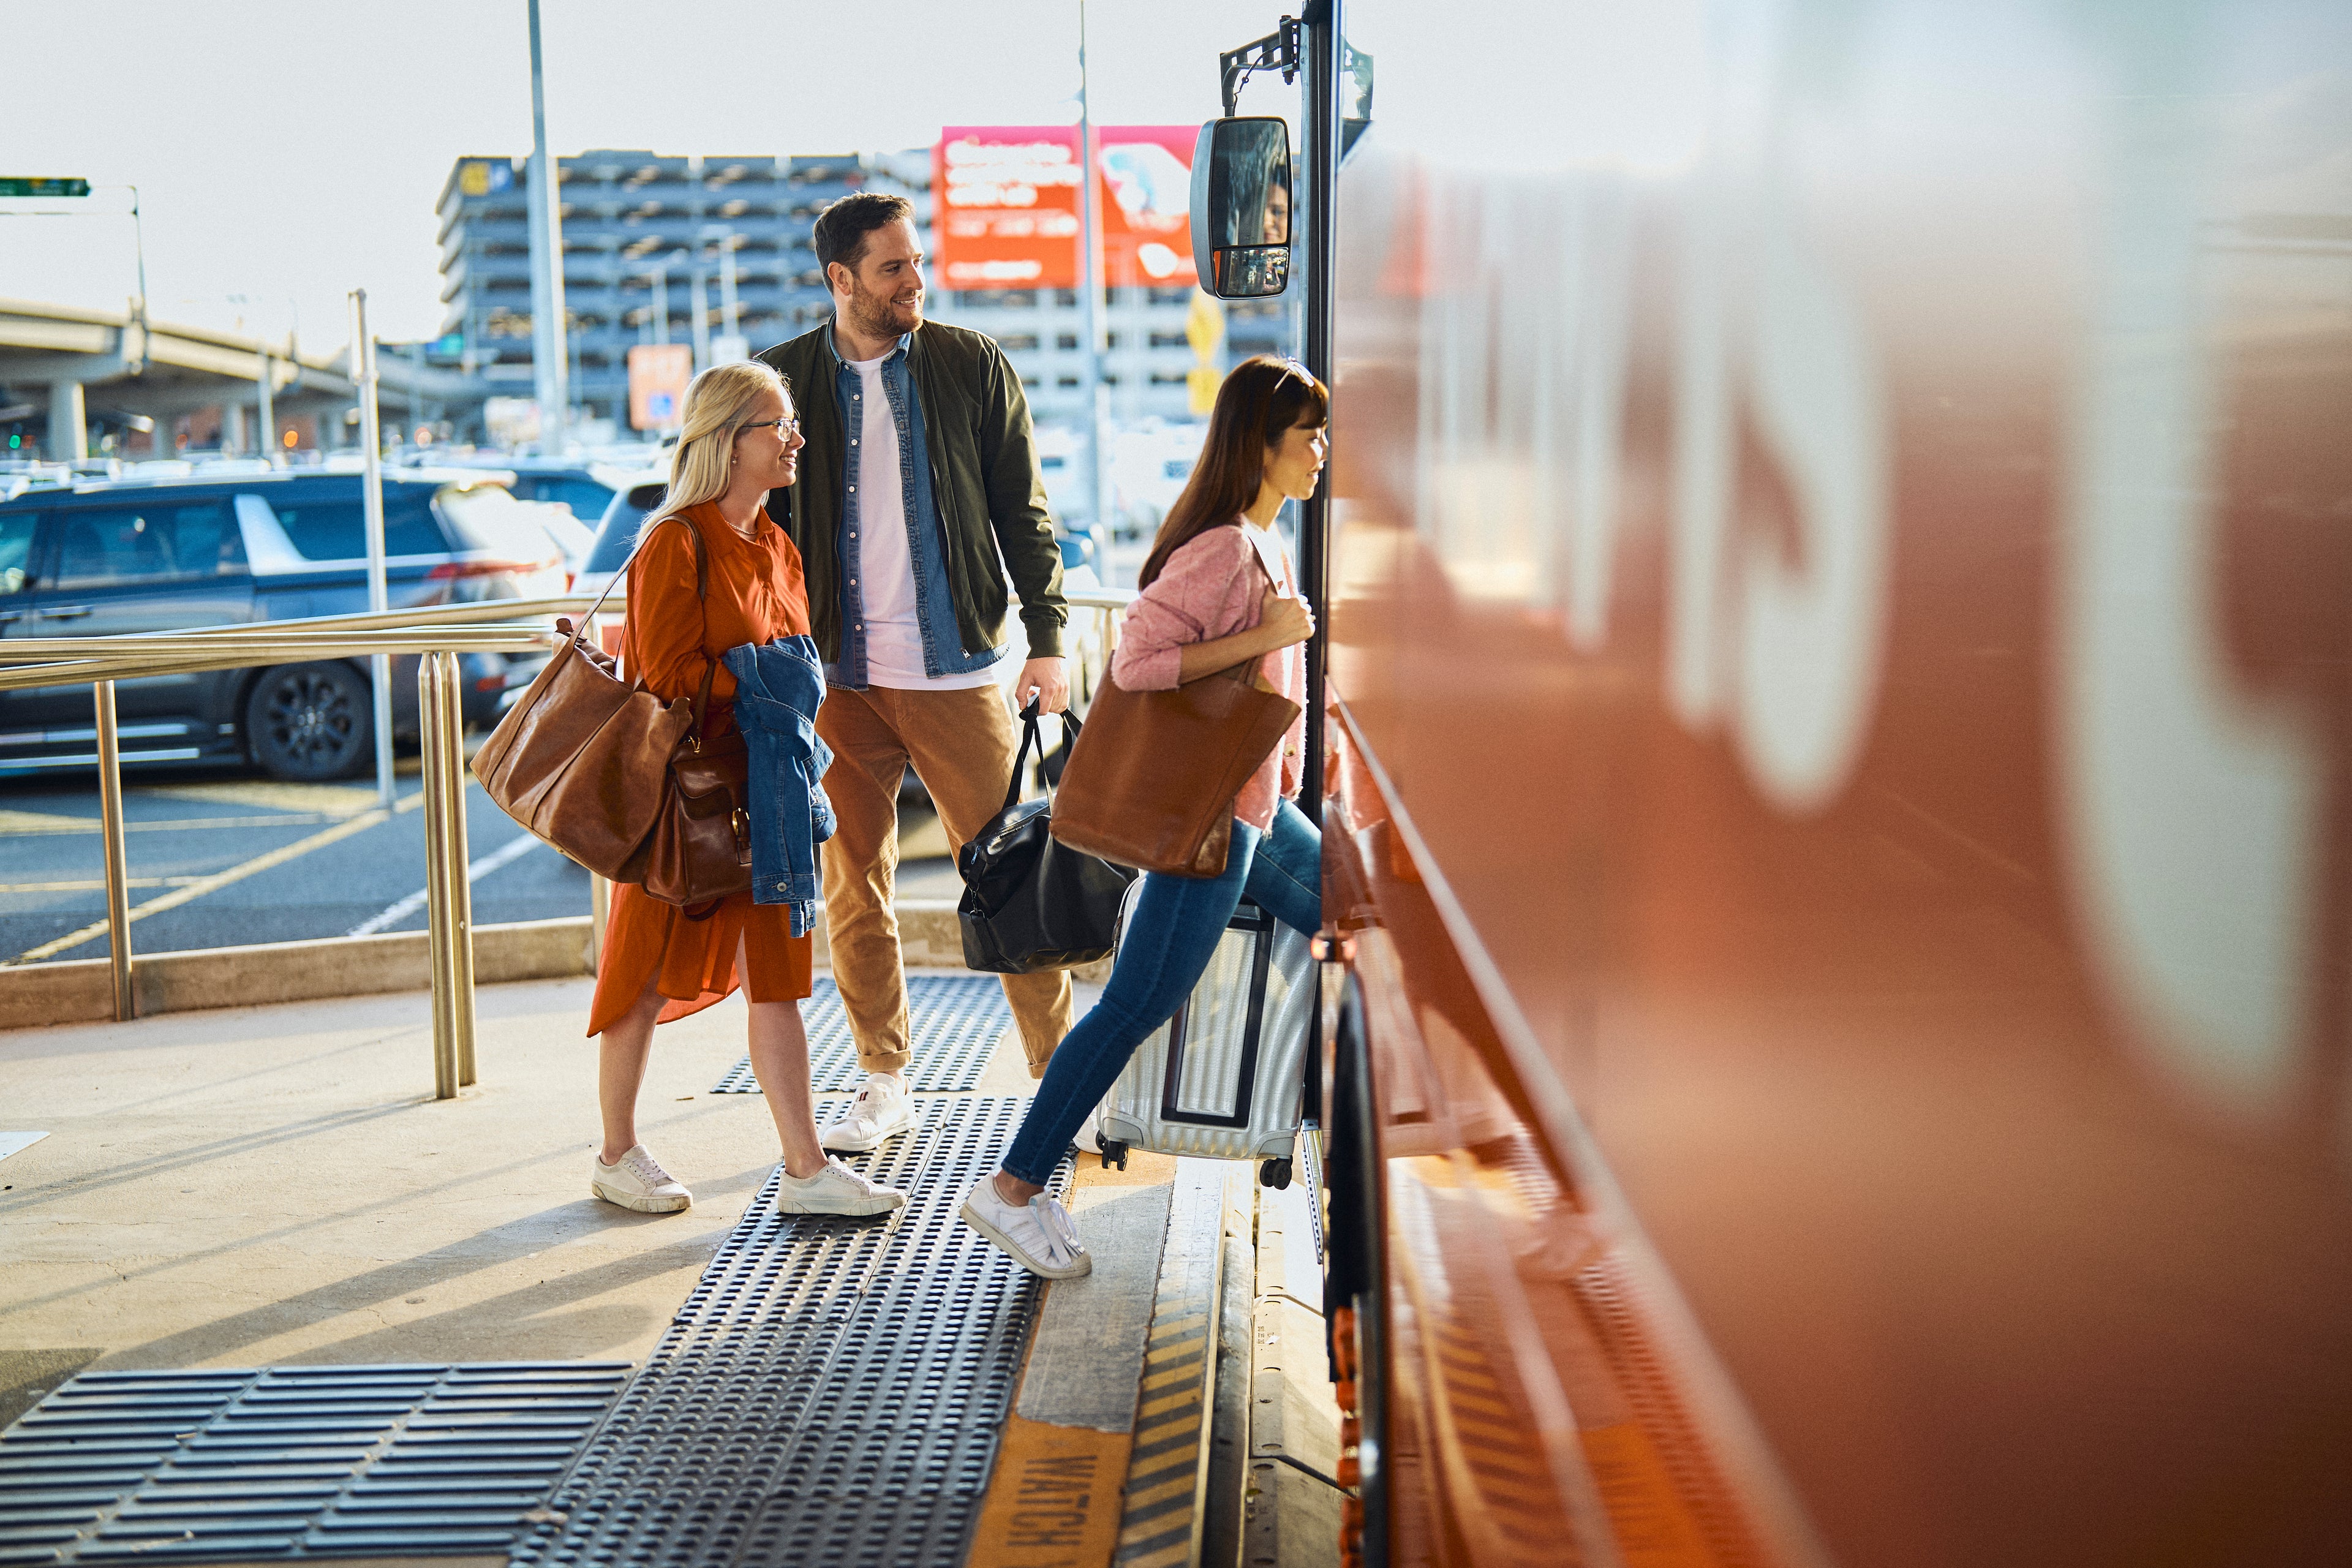 Free 24/7 shuttle every 15 minutes to terminals. With stops outside Terminal 4 and Terminal 1, you'll be at the door in no time.